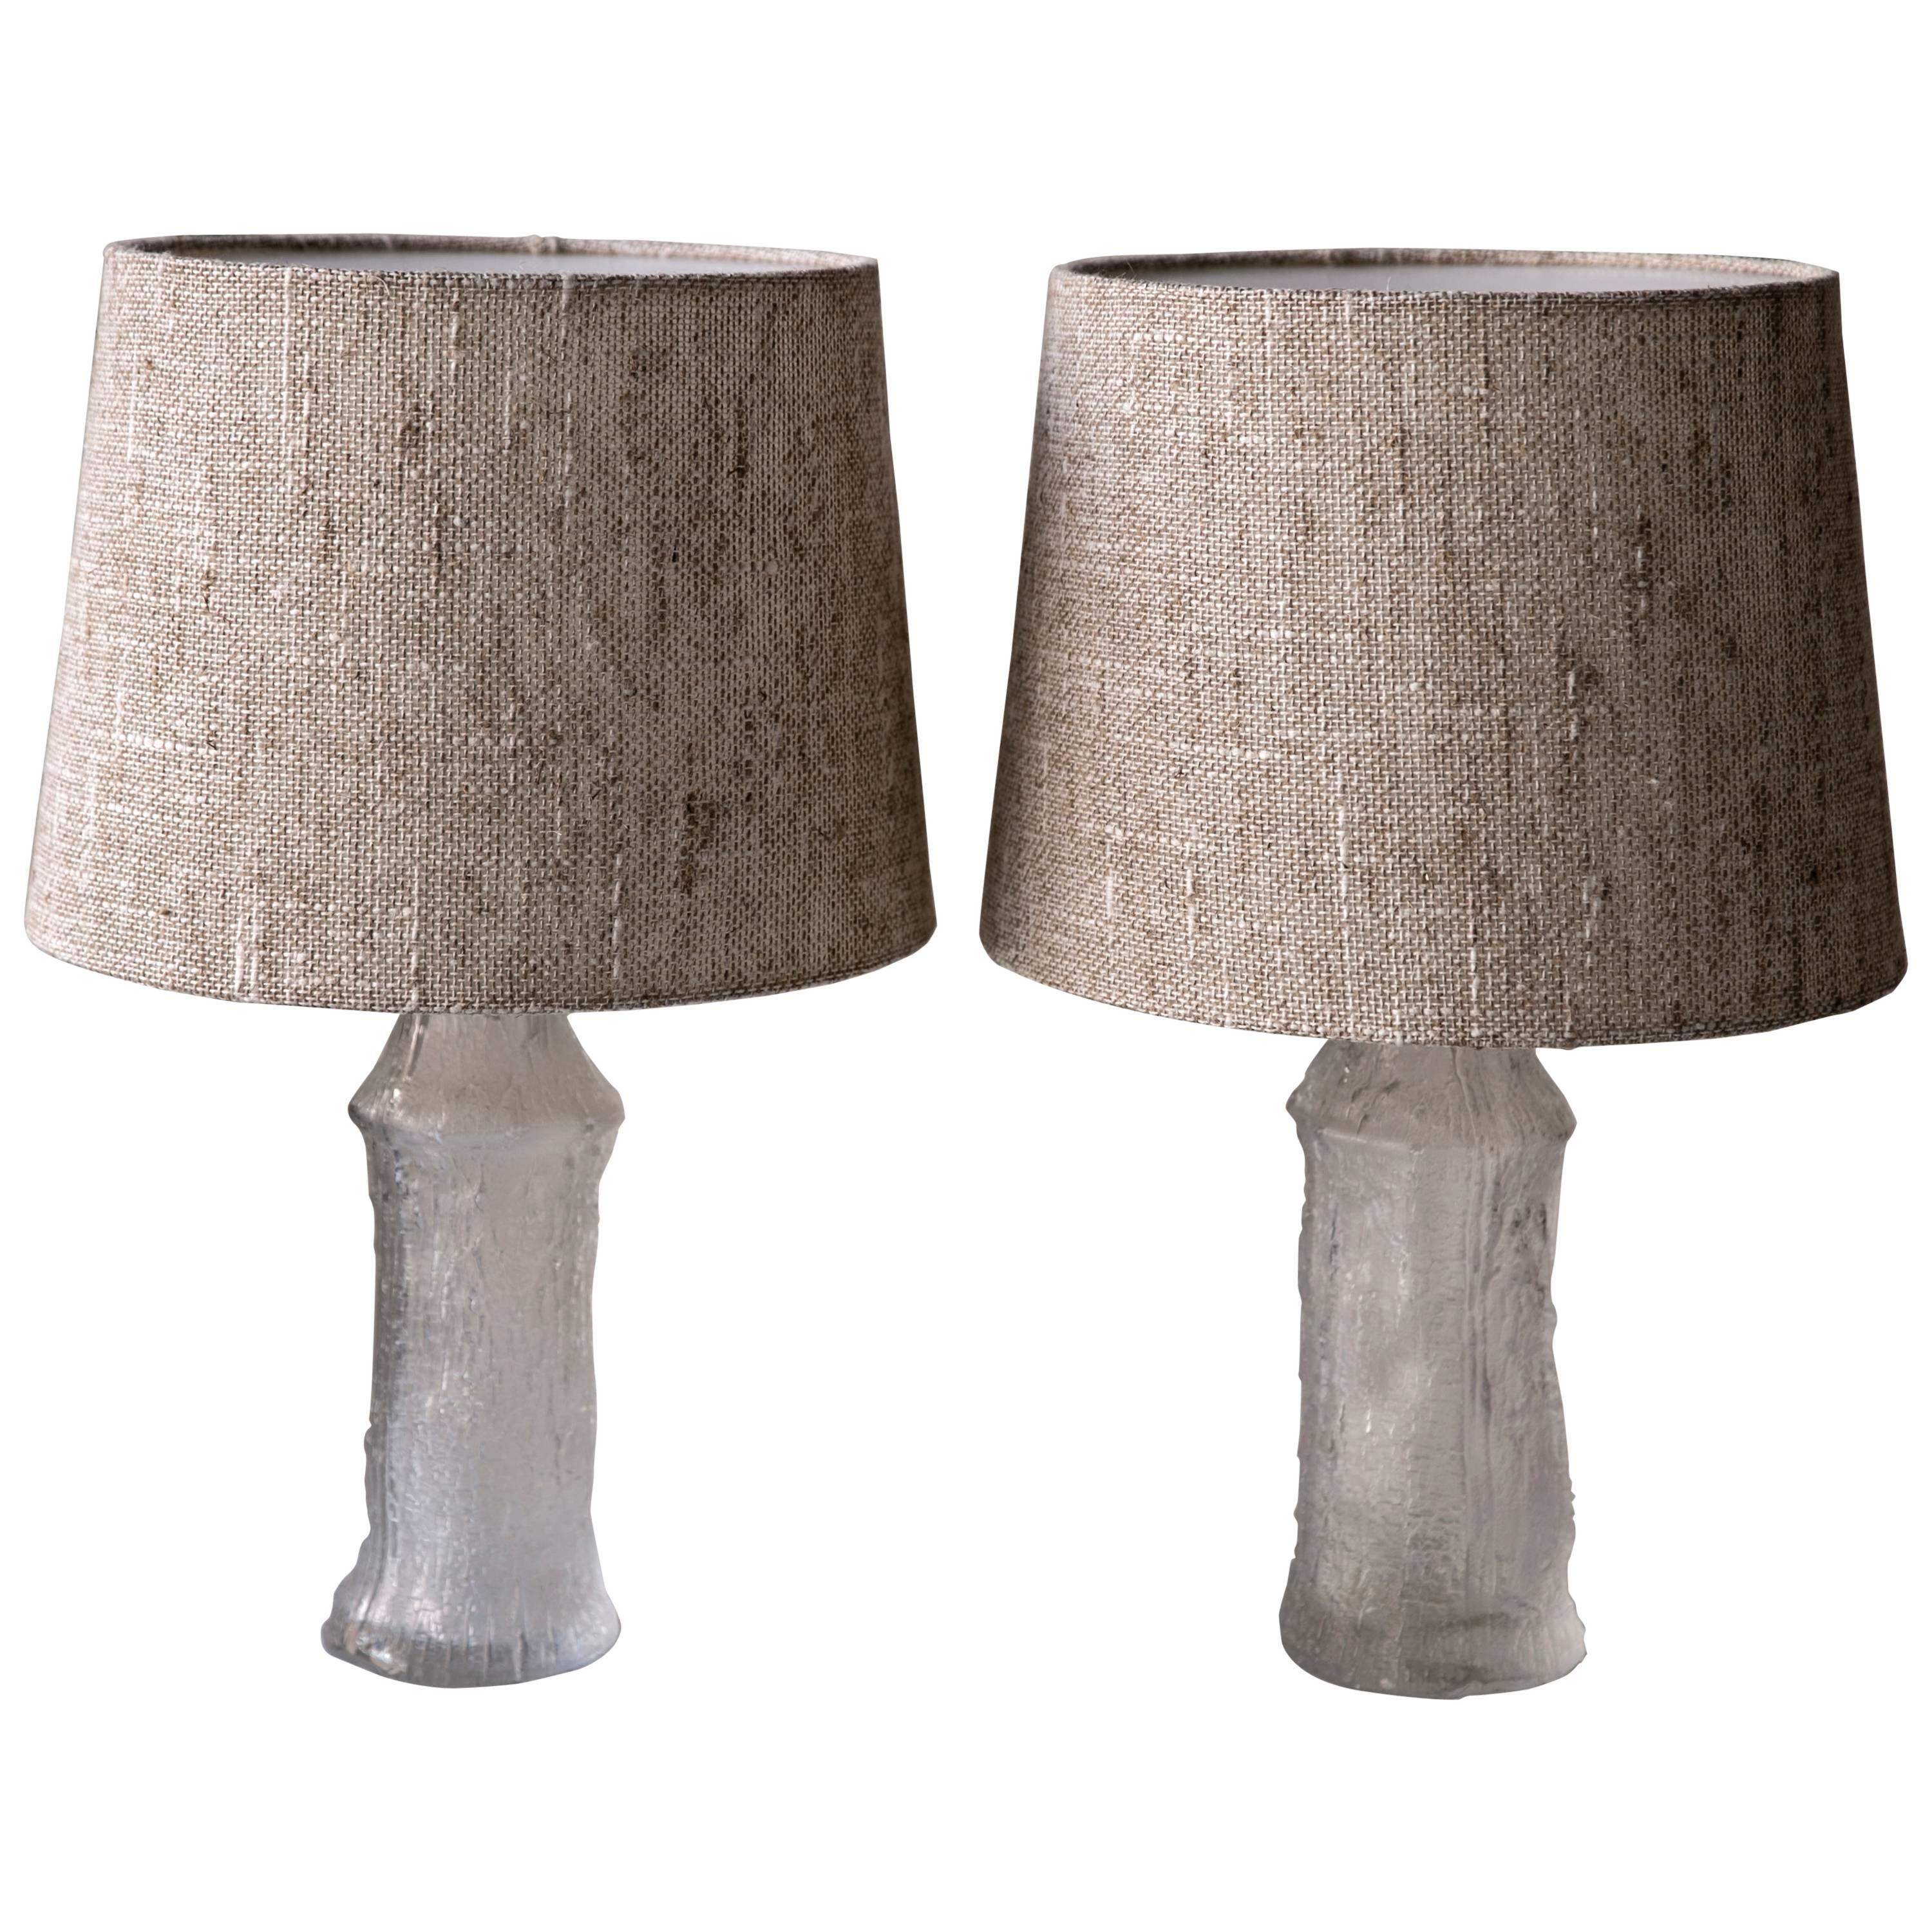 Pair of Sculptural Glass Table Lamps by Timo Sarpaneva For Sale